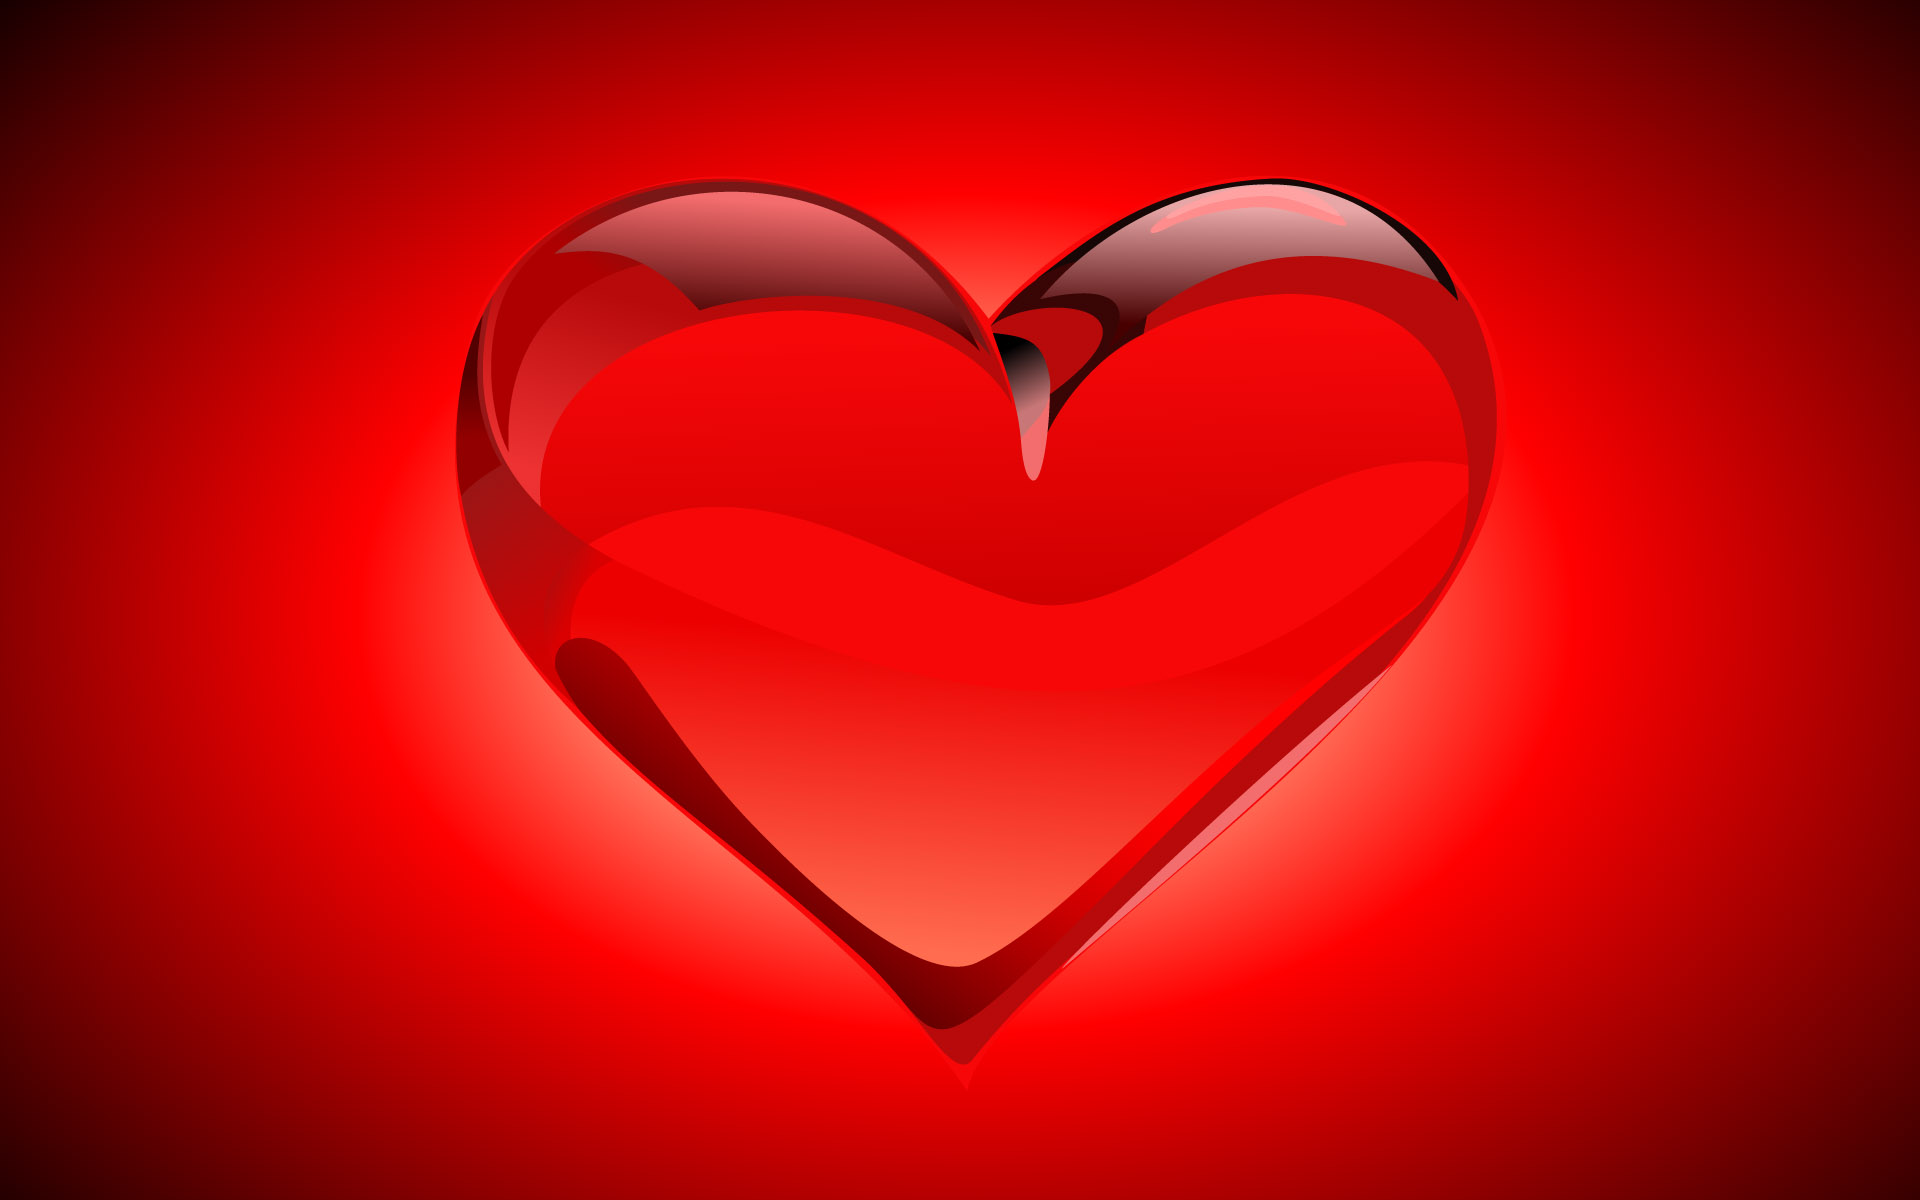 HEART WALLPAPERS FREE Wallpapers Background images   hippowallpapers